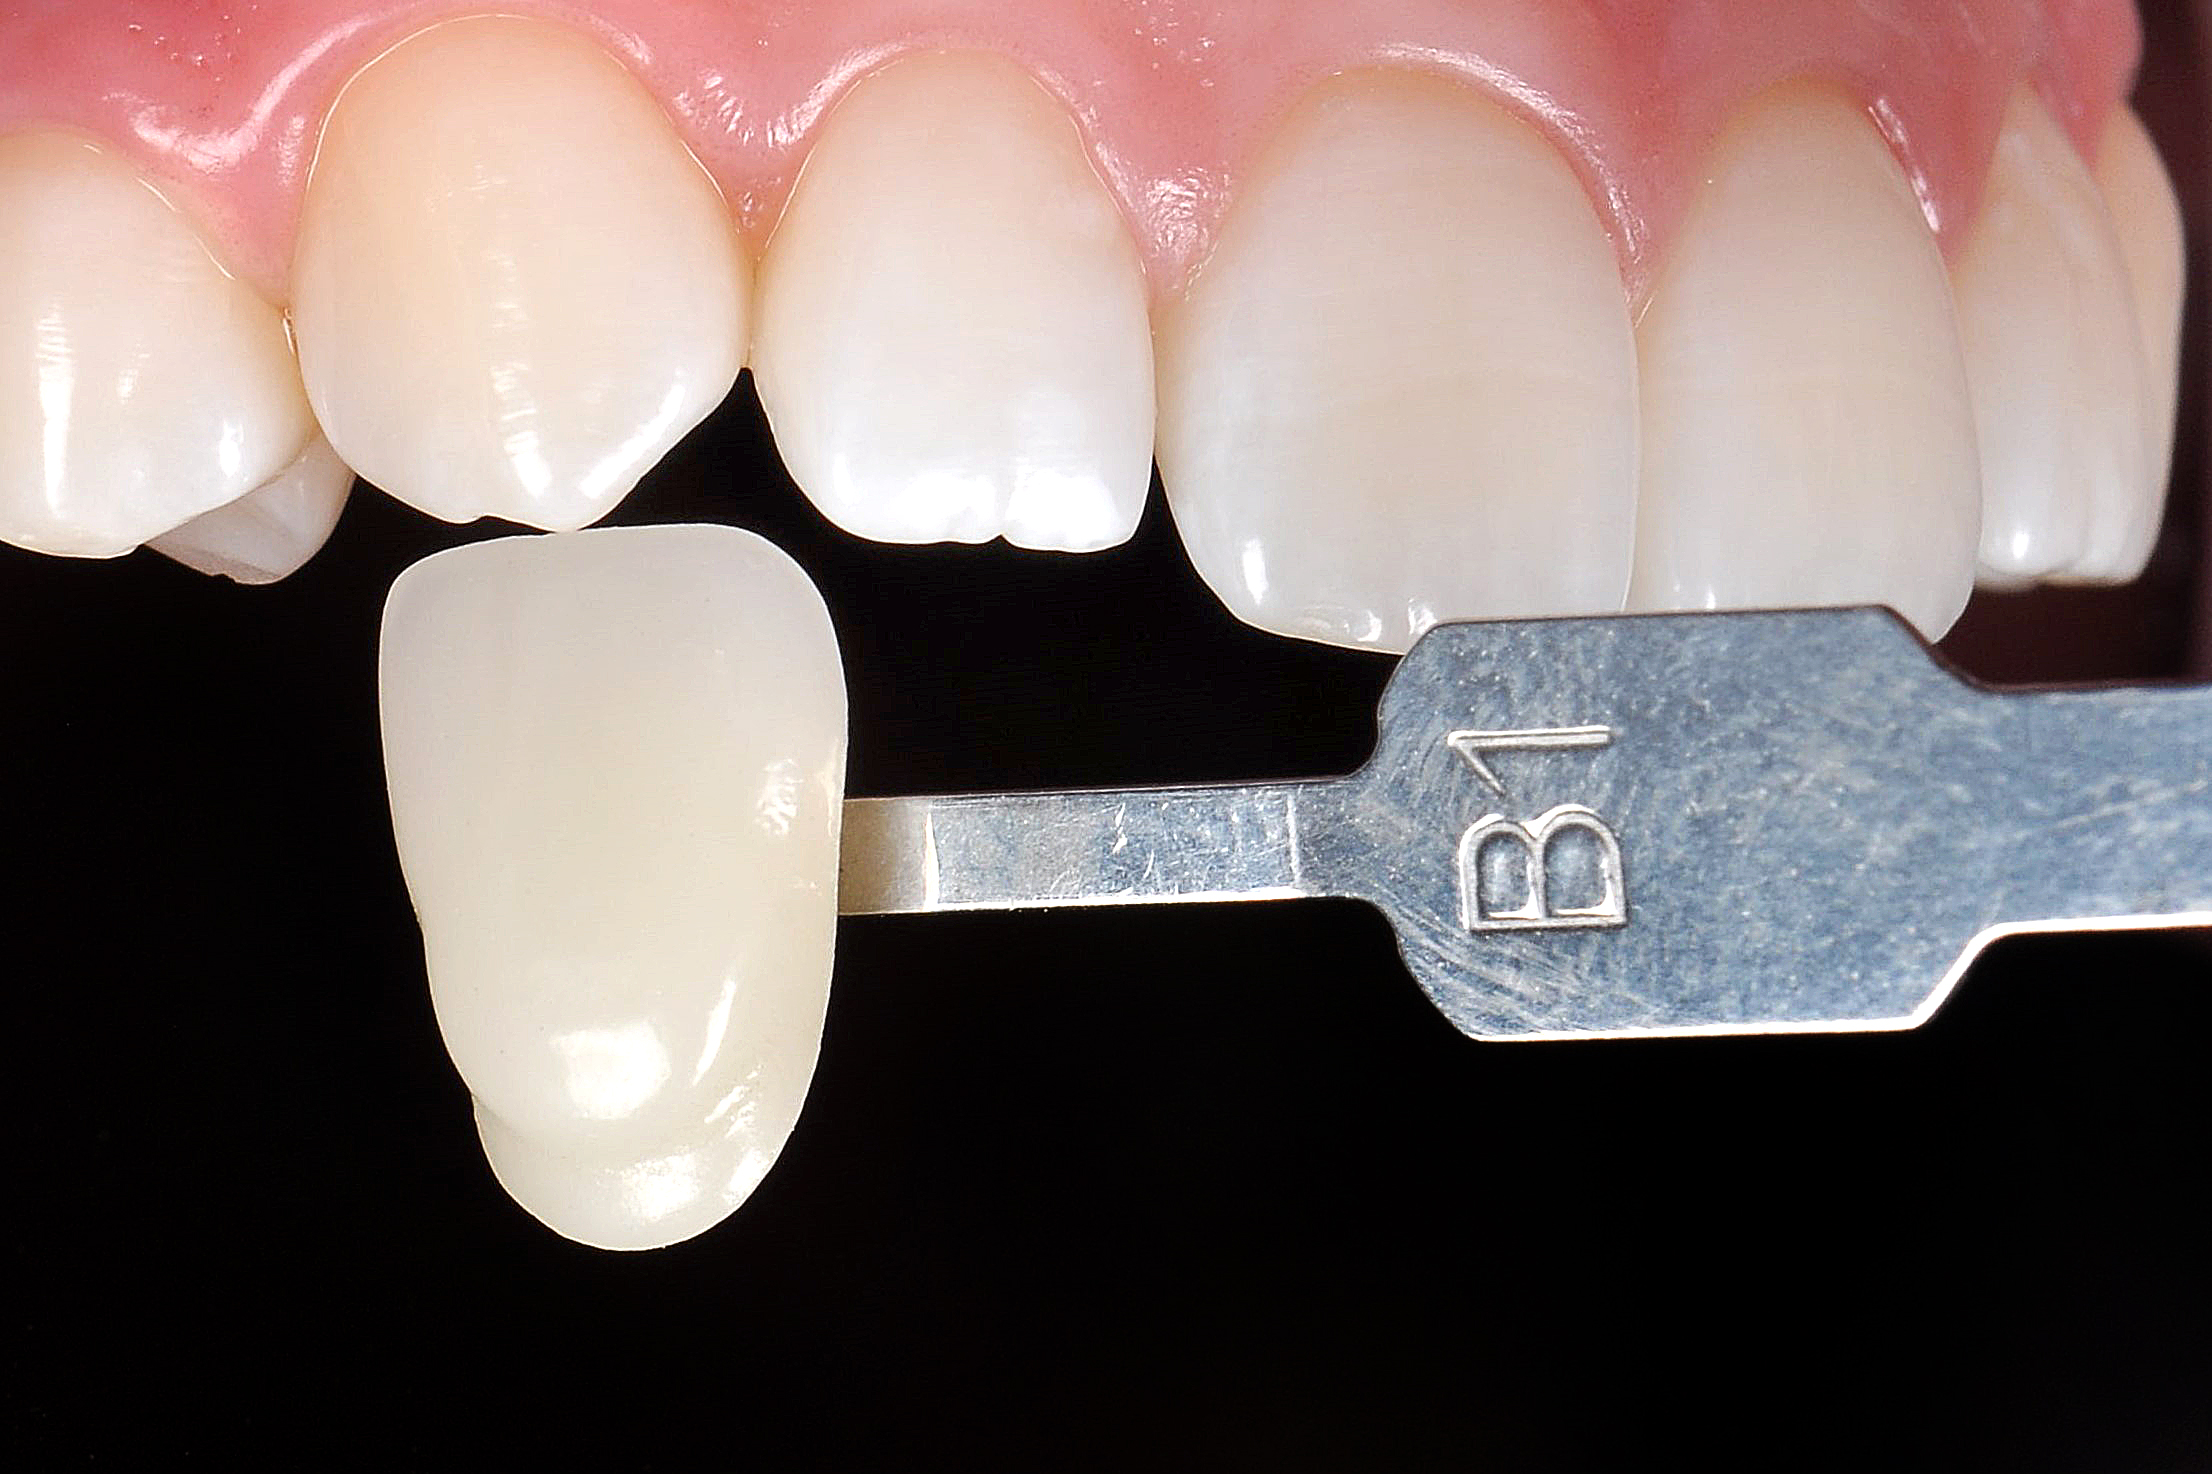 8 | Registration of the final shade, after 1 month of the whitening procedure.